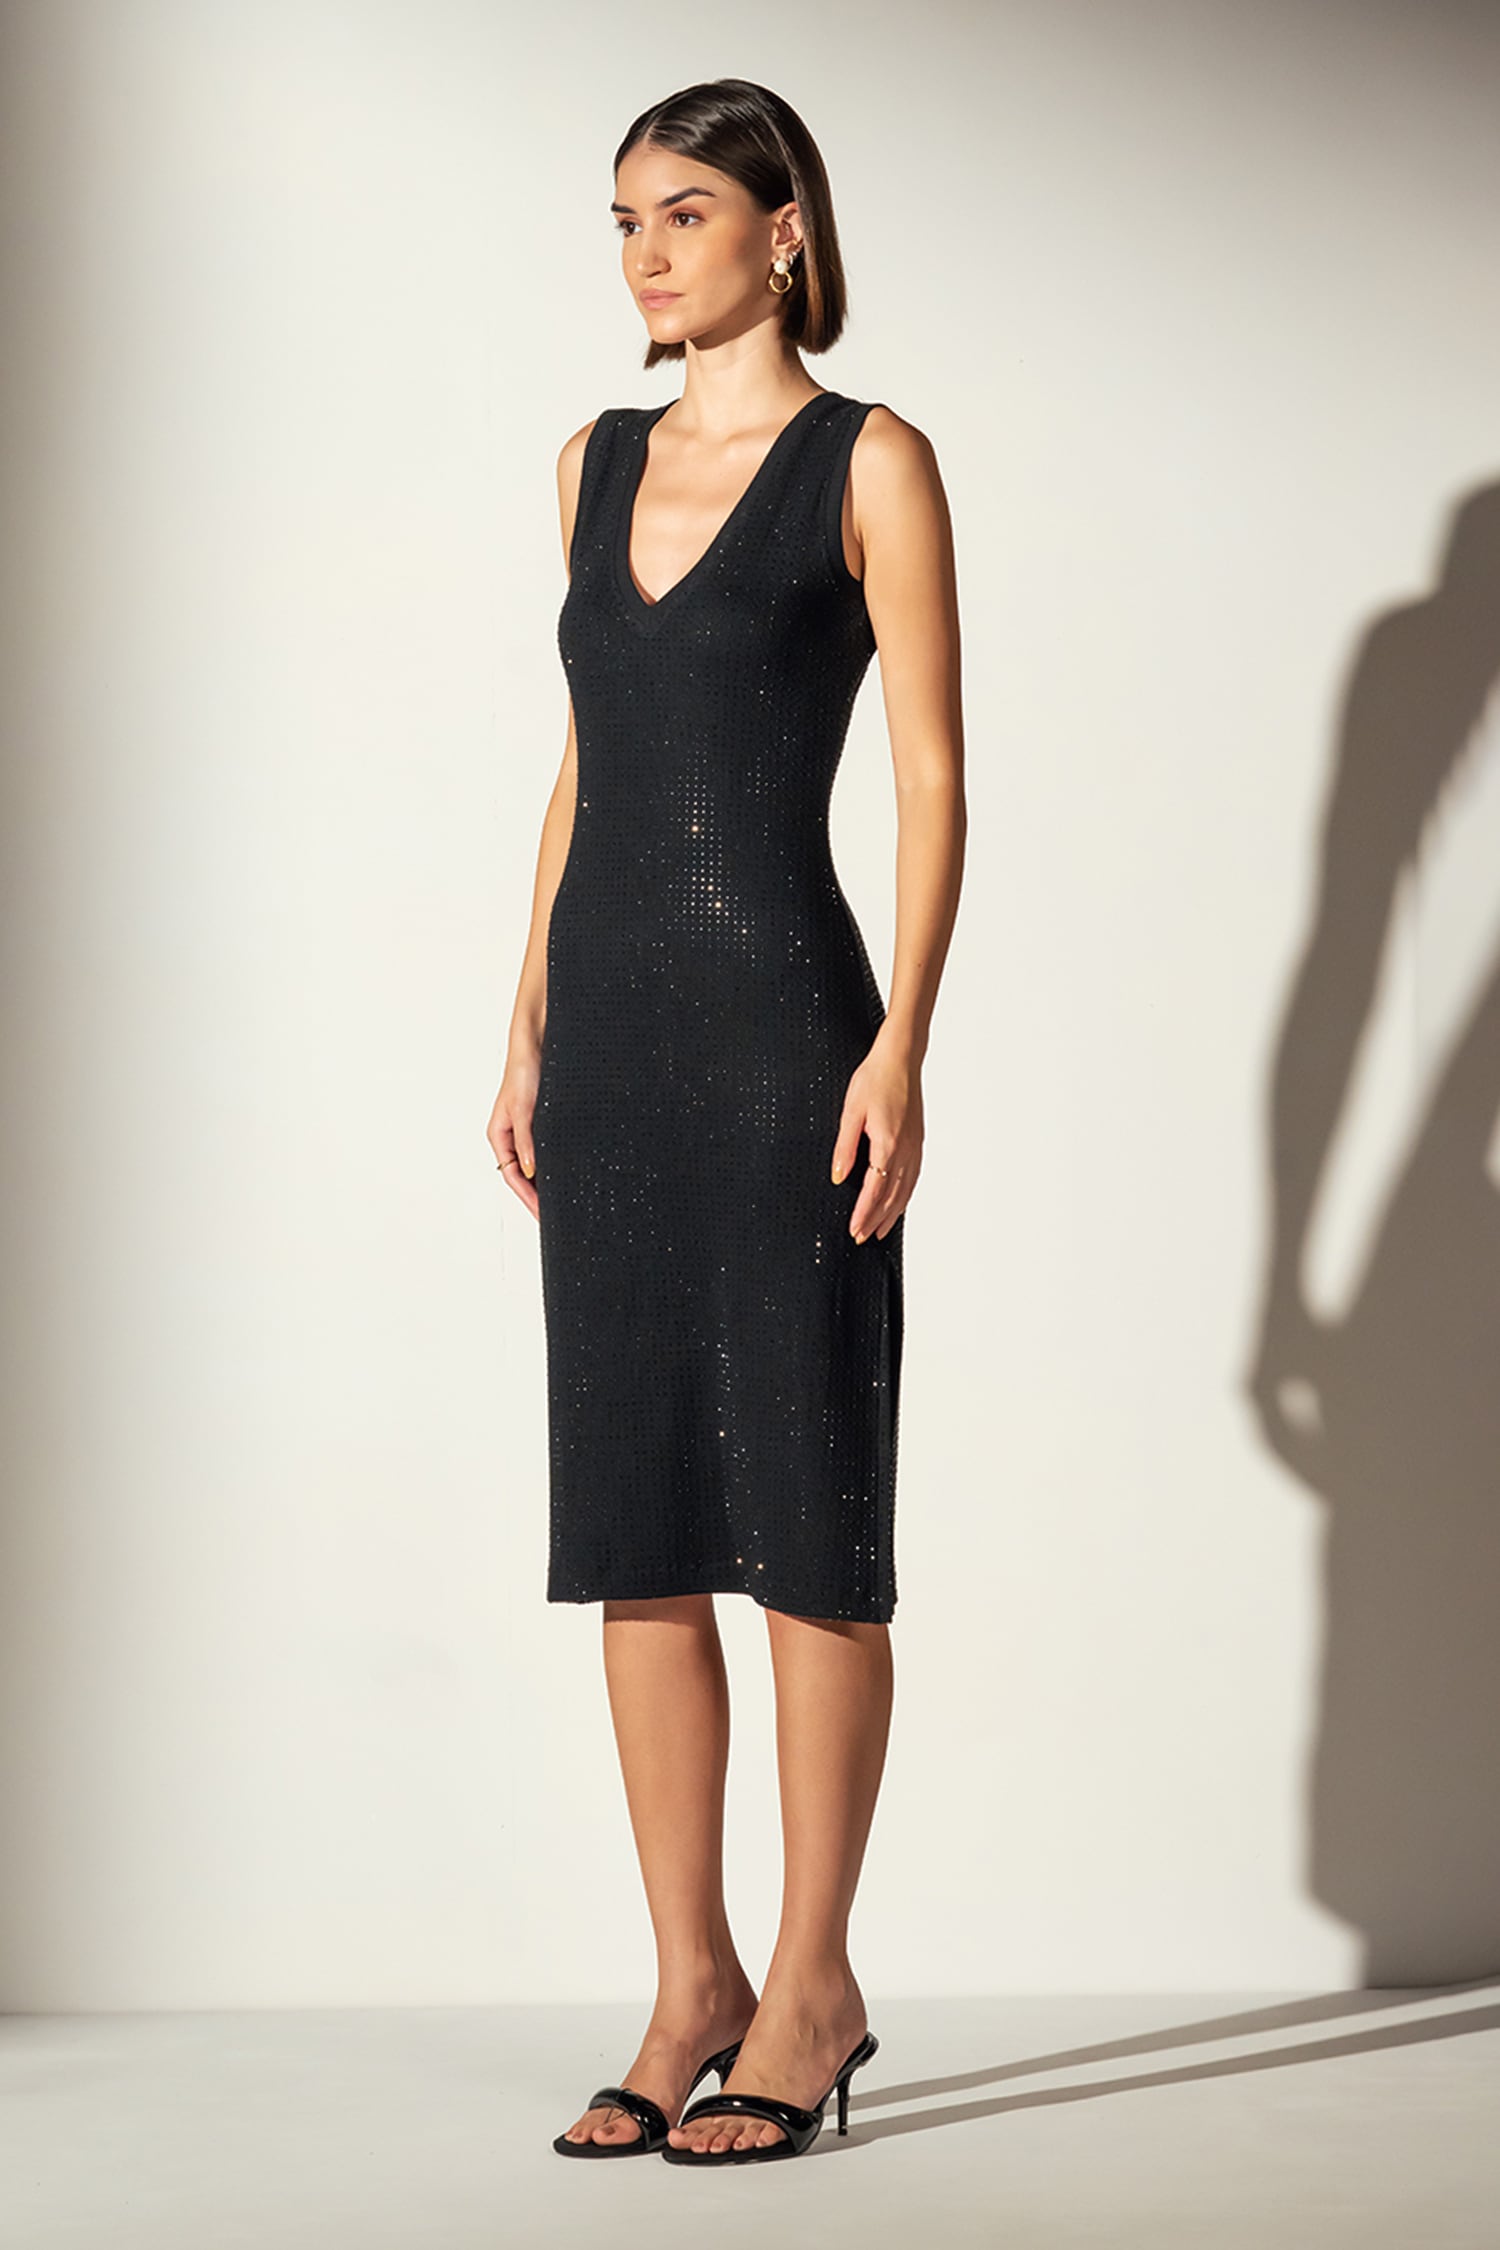 Black Sheath Dress by The Kooples for $50 | Rent the Runway